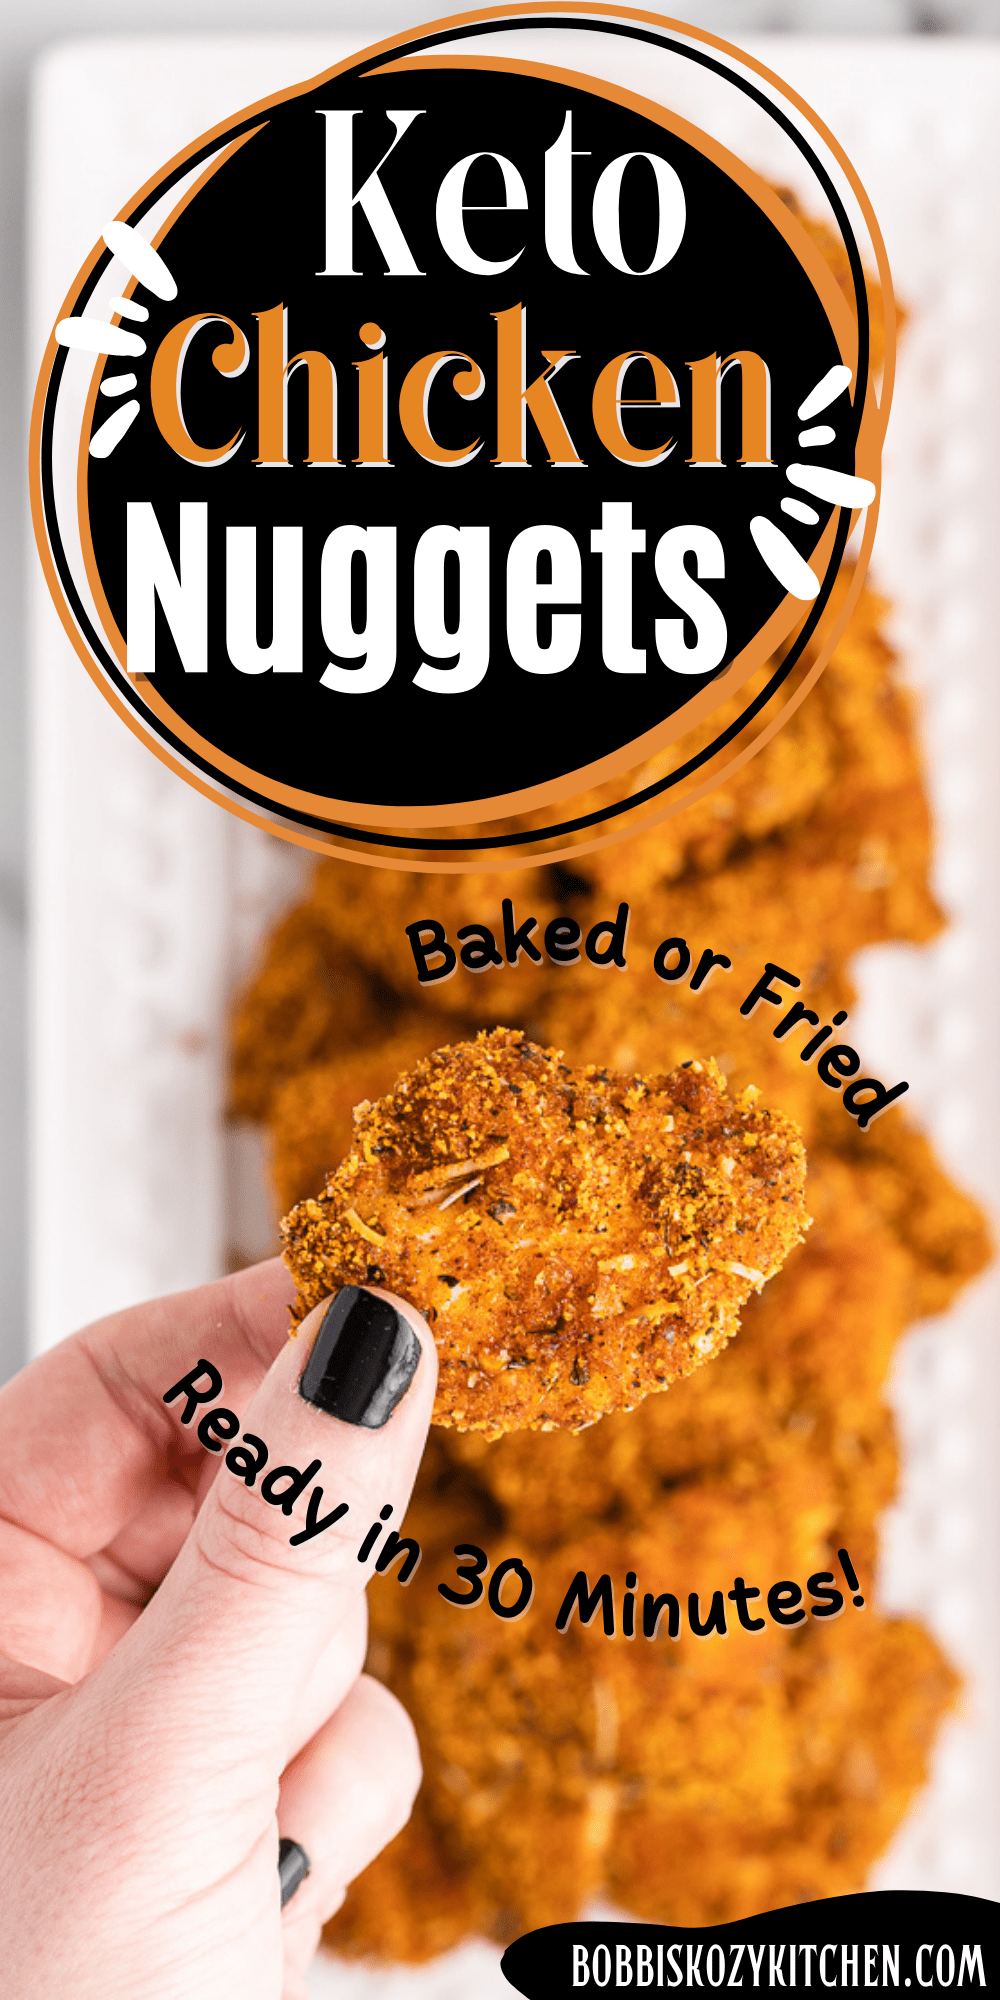 Pinterest graphic with image of keto chicken nuggets on it.